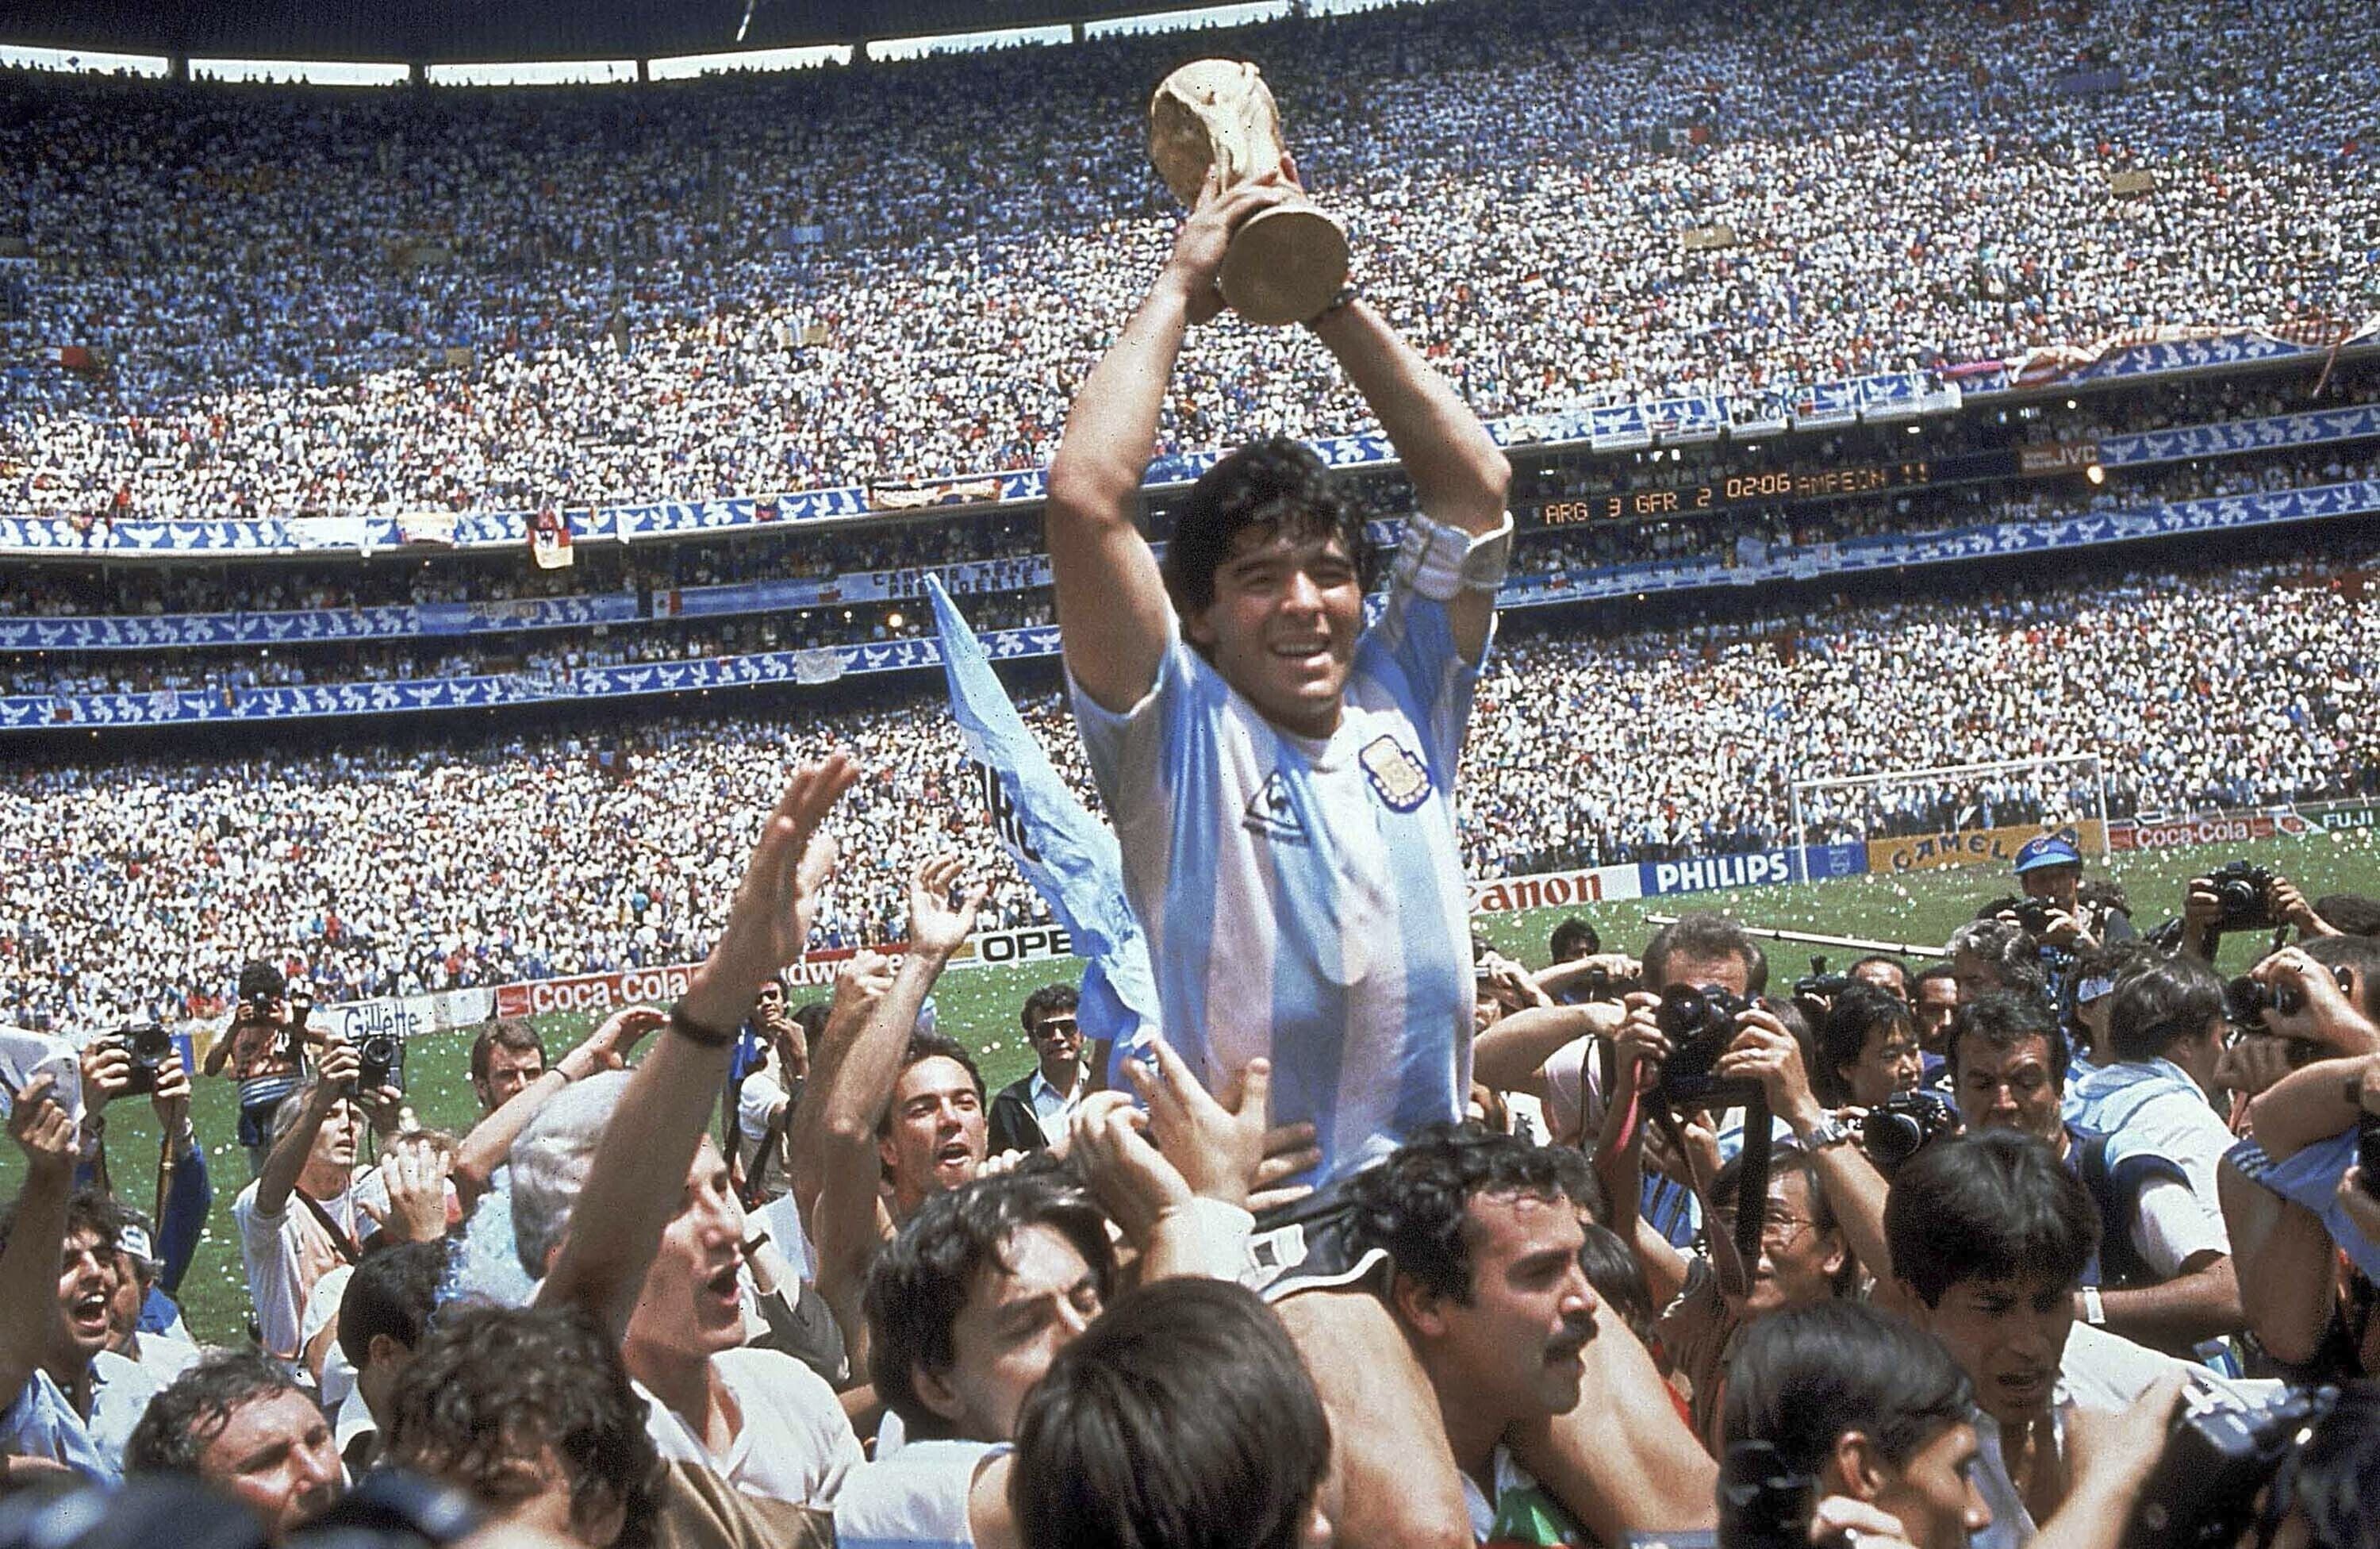 Diego Maradona holds up the World Cup after Argentina’s 3-2 over West Germany in the final at Azteca Stadium in Mexico City. Photo: AP